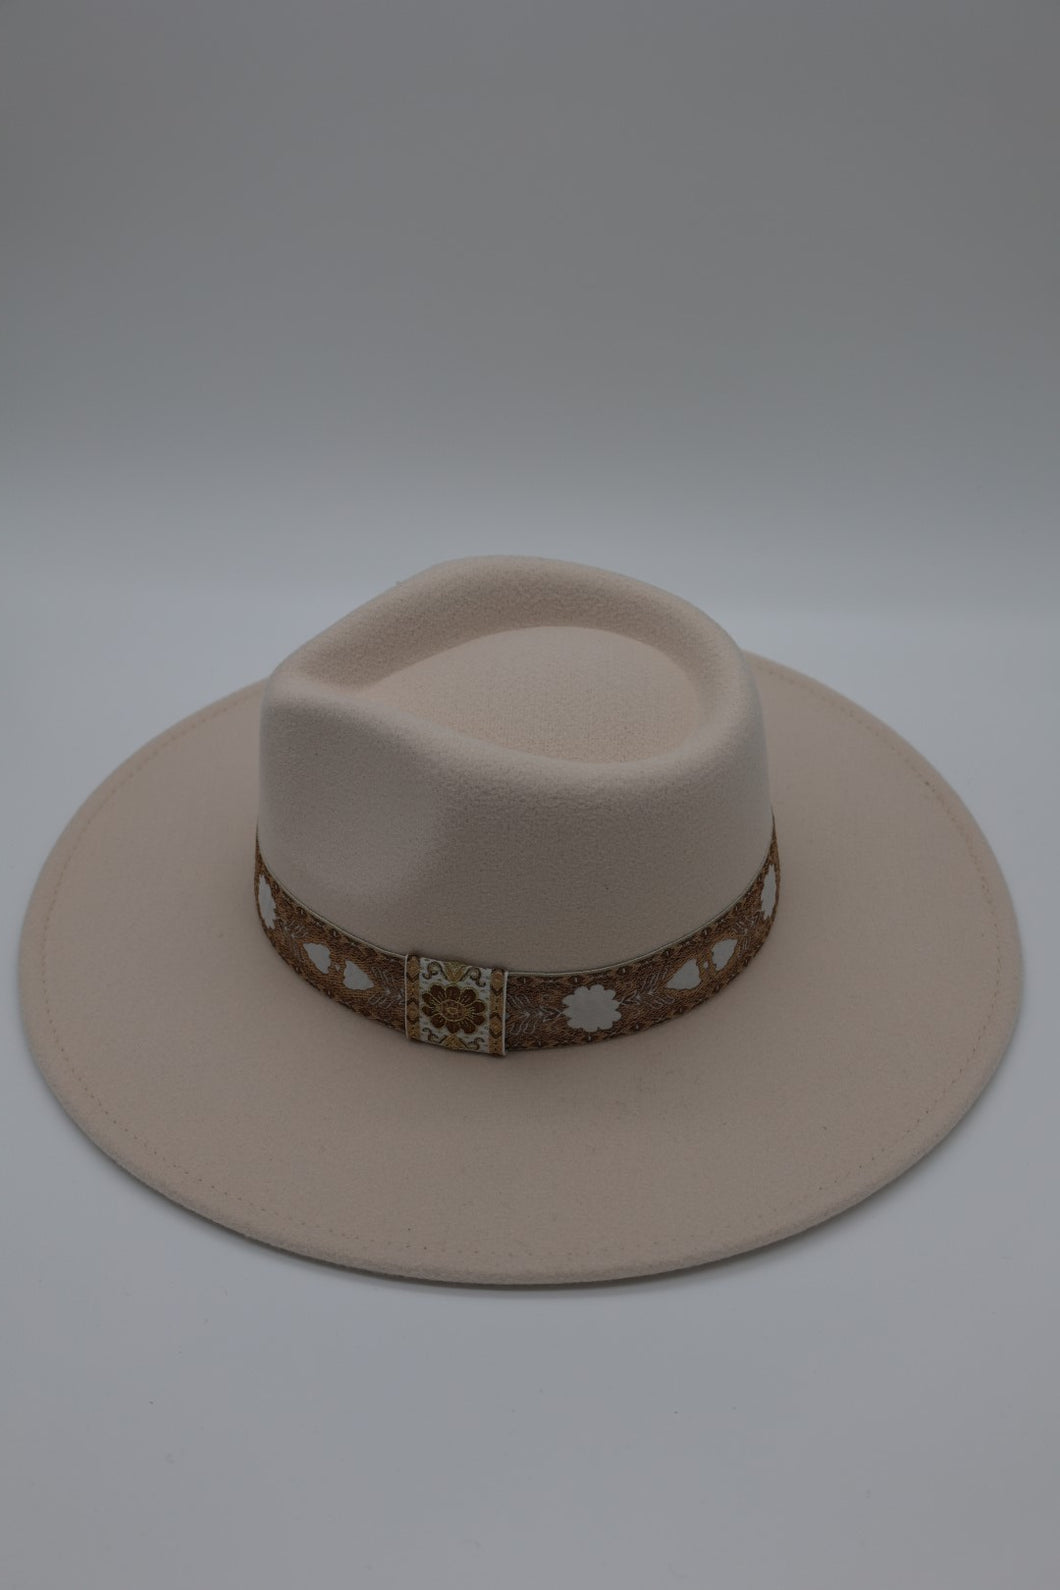 Heads Winds Ivory Fedora Hat by LuvLeigh Apparel